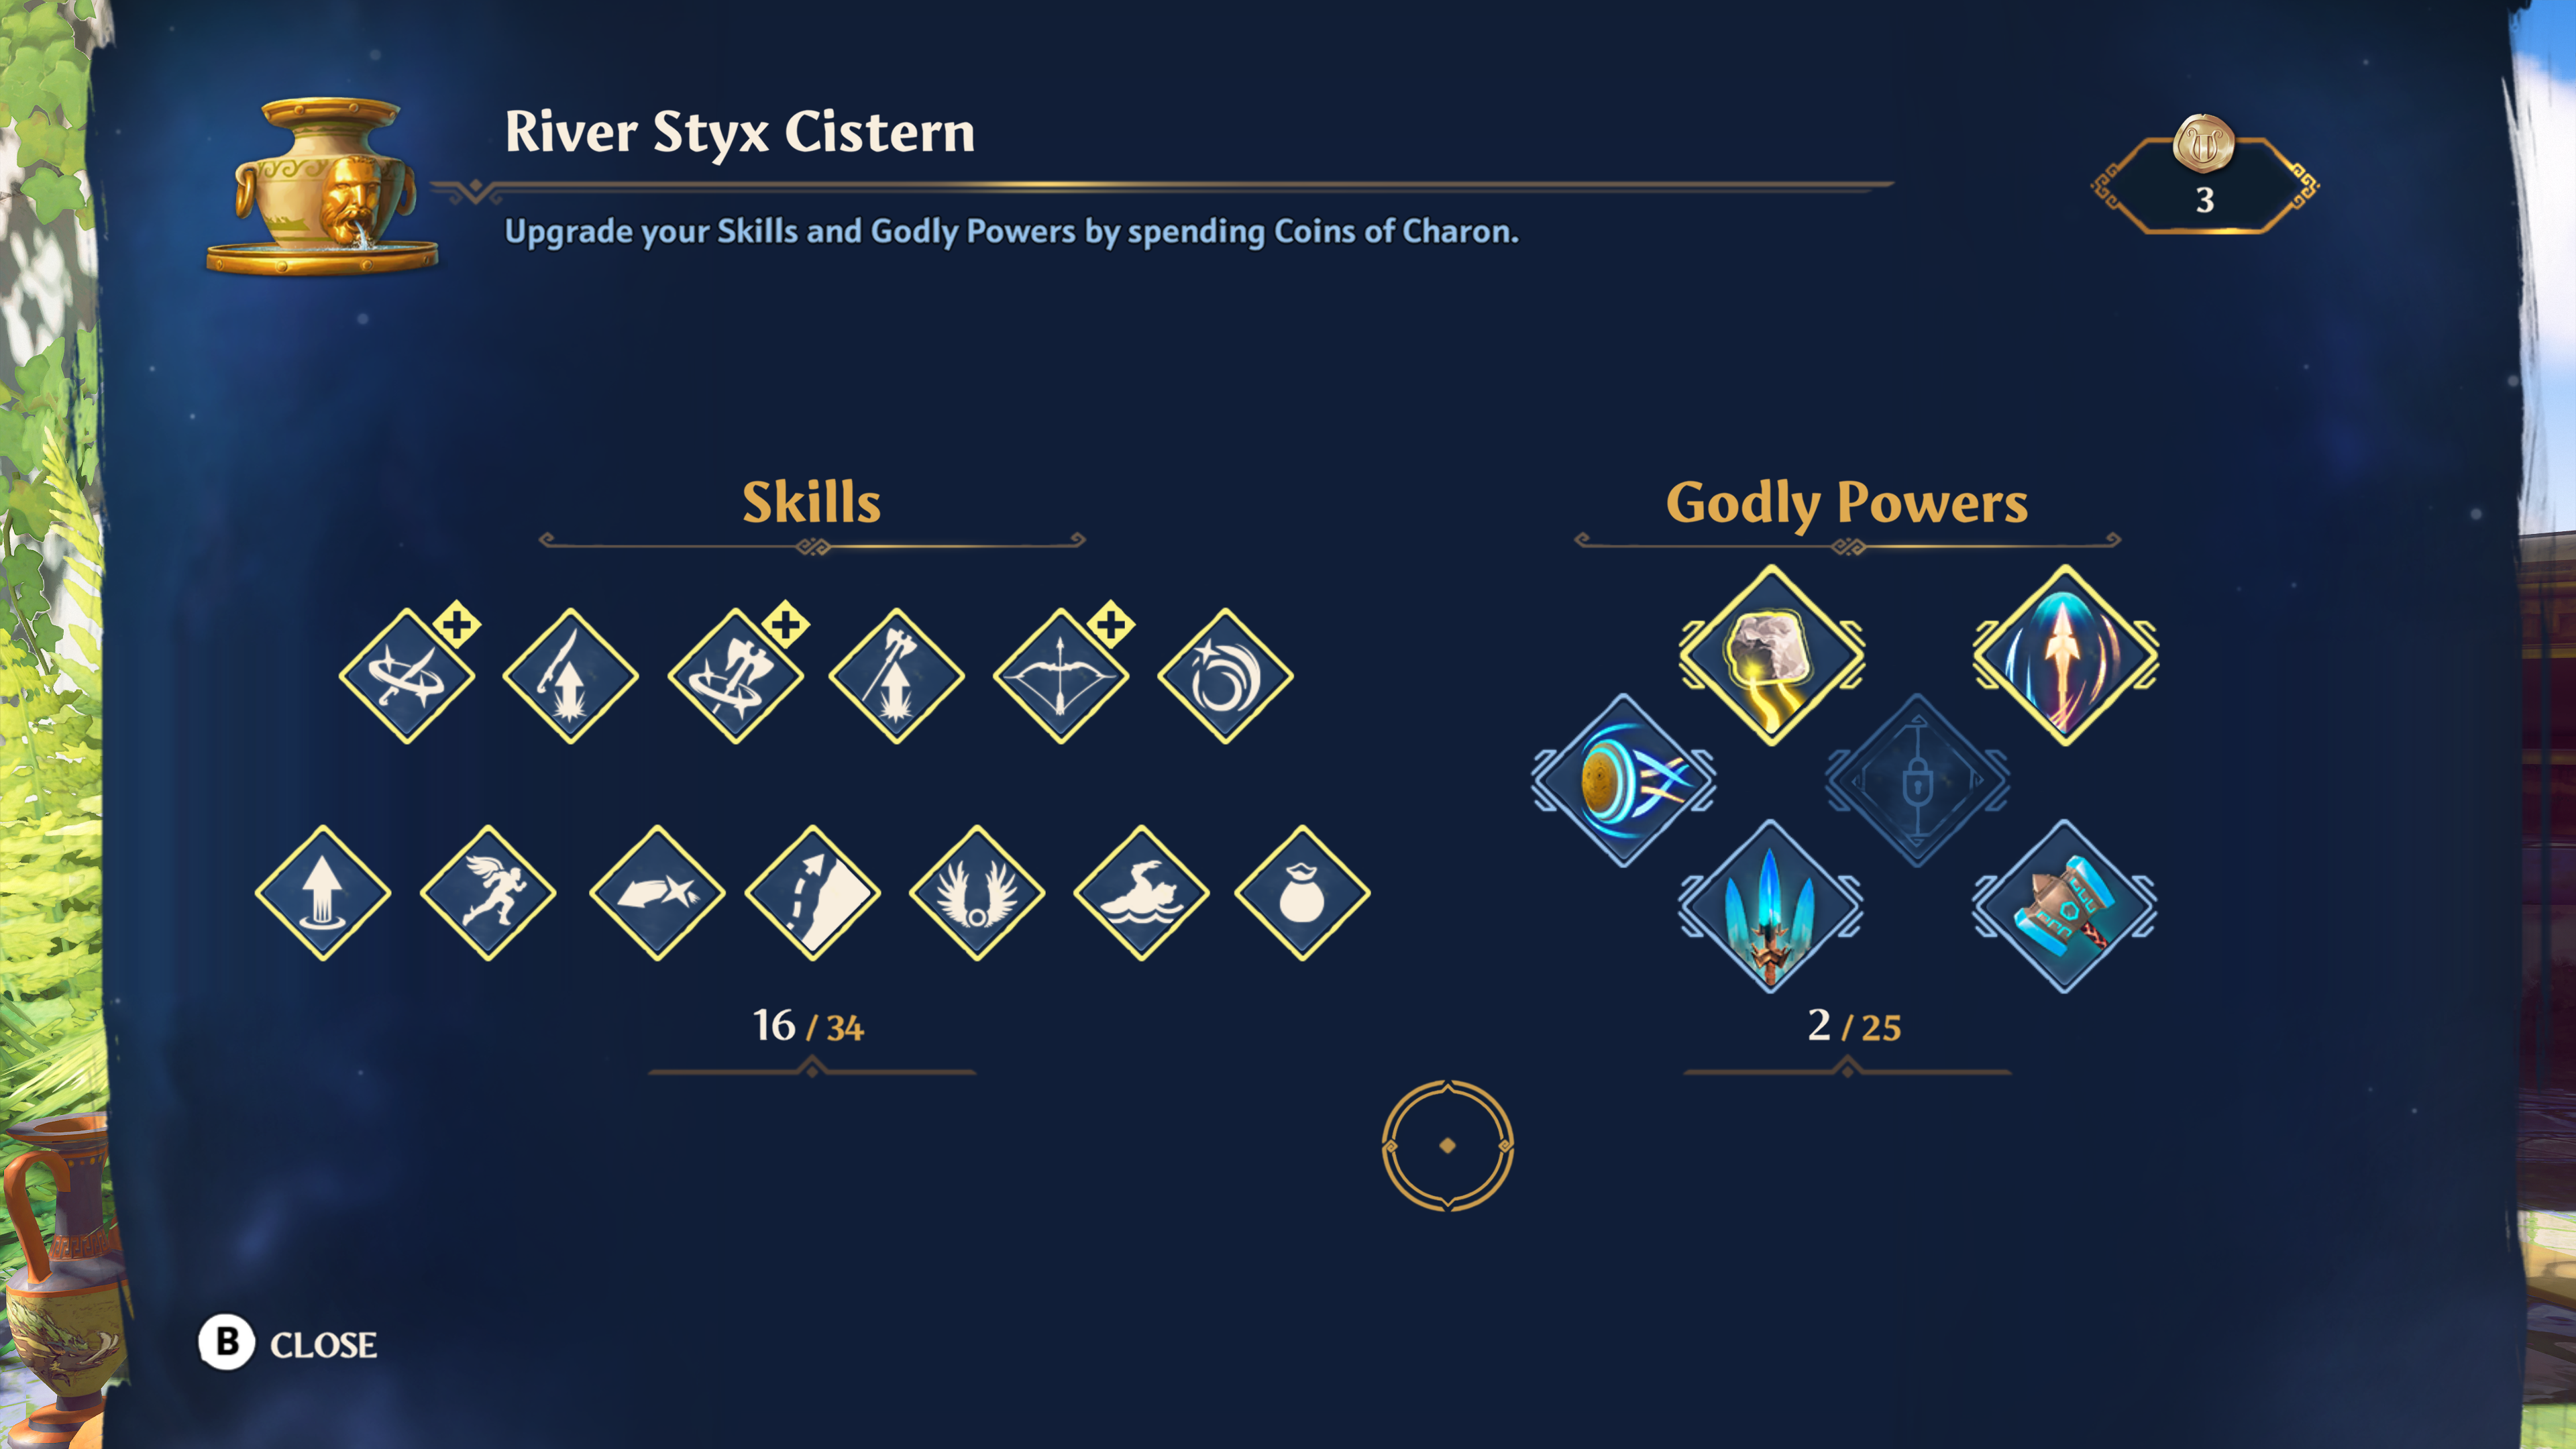 How to upgrade Godly Powers and Skills